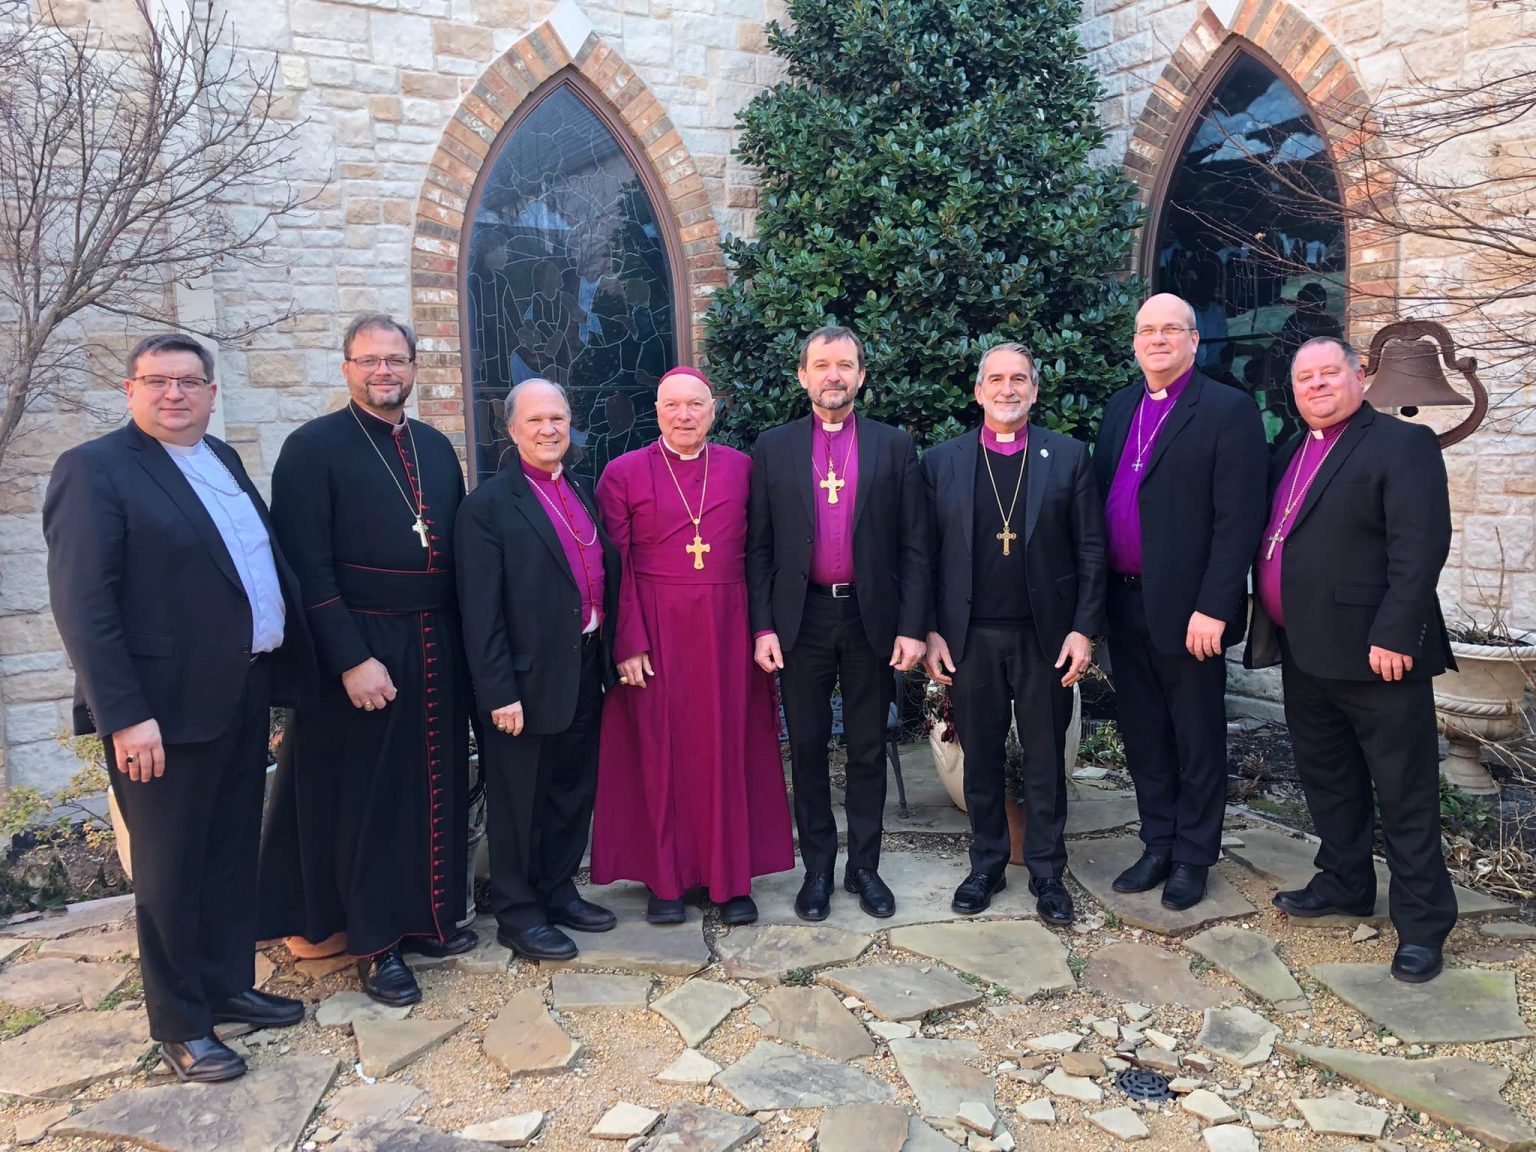 ACNA-meeting-with-ELCL-in-Dallas-2022.01.29-1536x1152.jpg